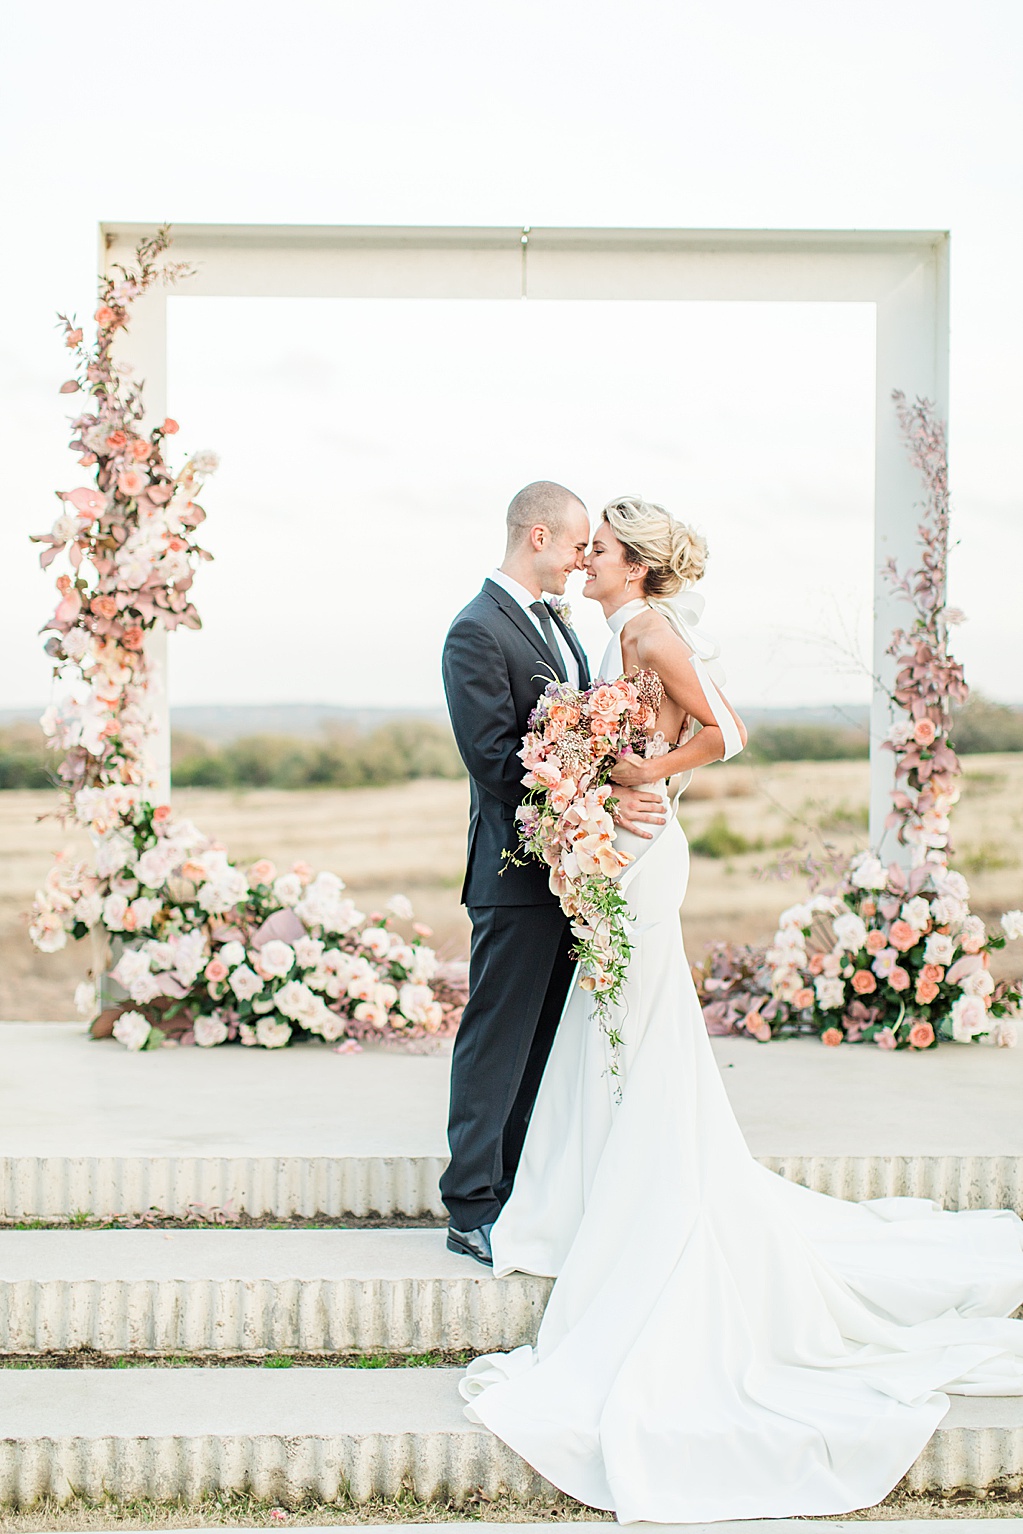 Blush mauve peach and coral wedding inspiration at Prospect House in Dripping Springs Texas wedding venue by Allison Jeffers Photography 0053